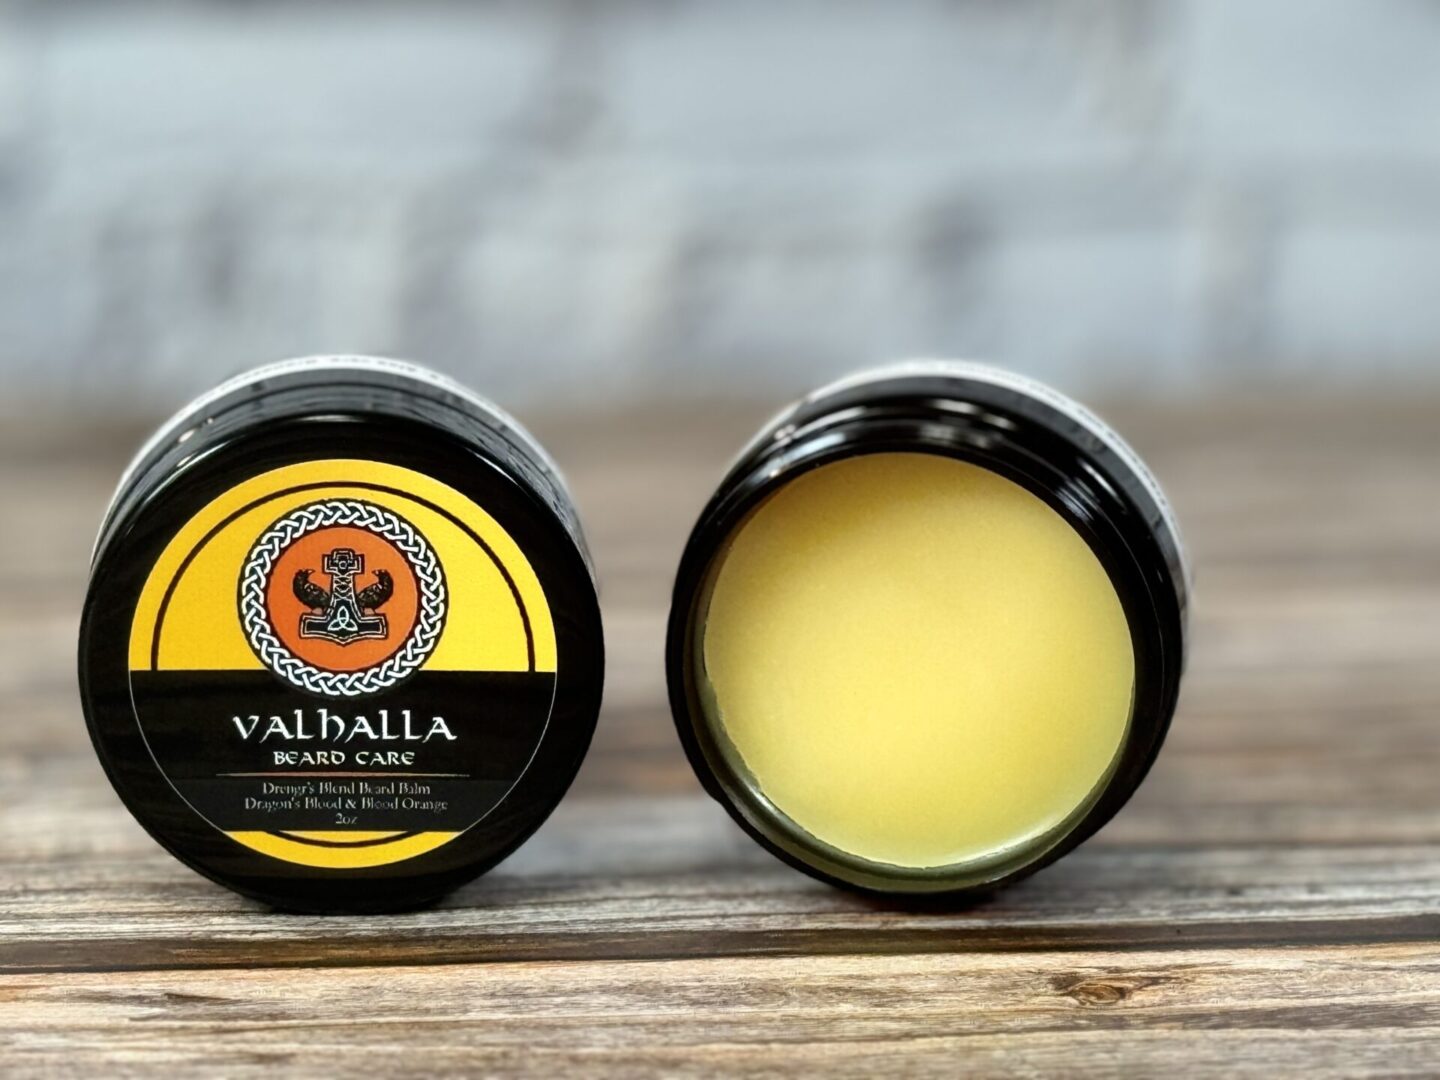 A close up of two containers of balm